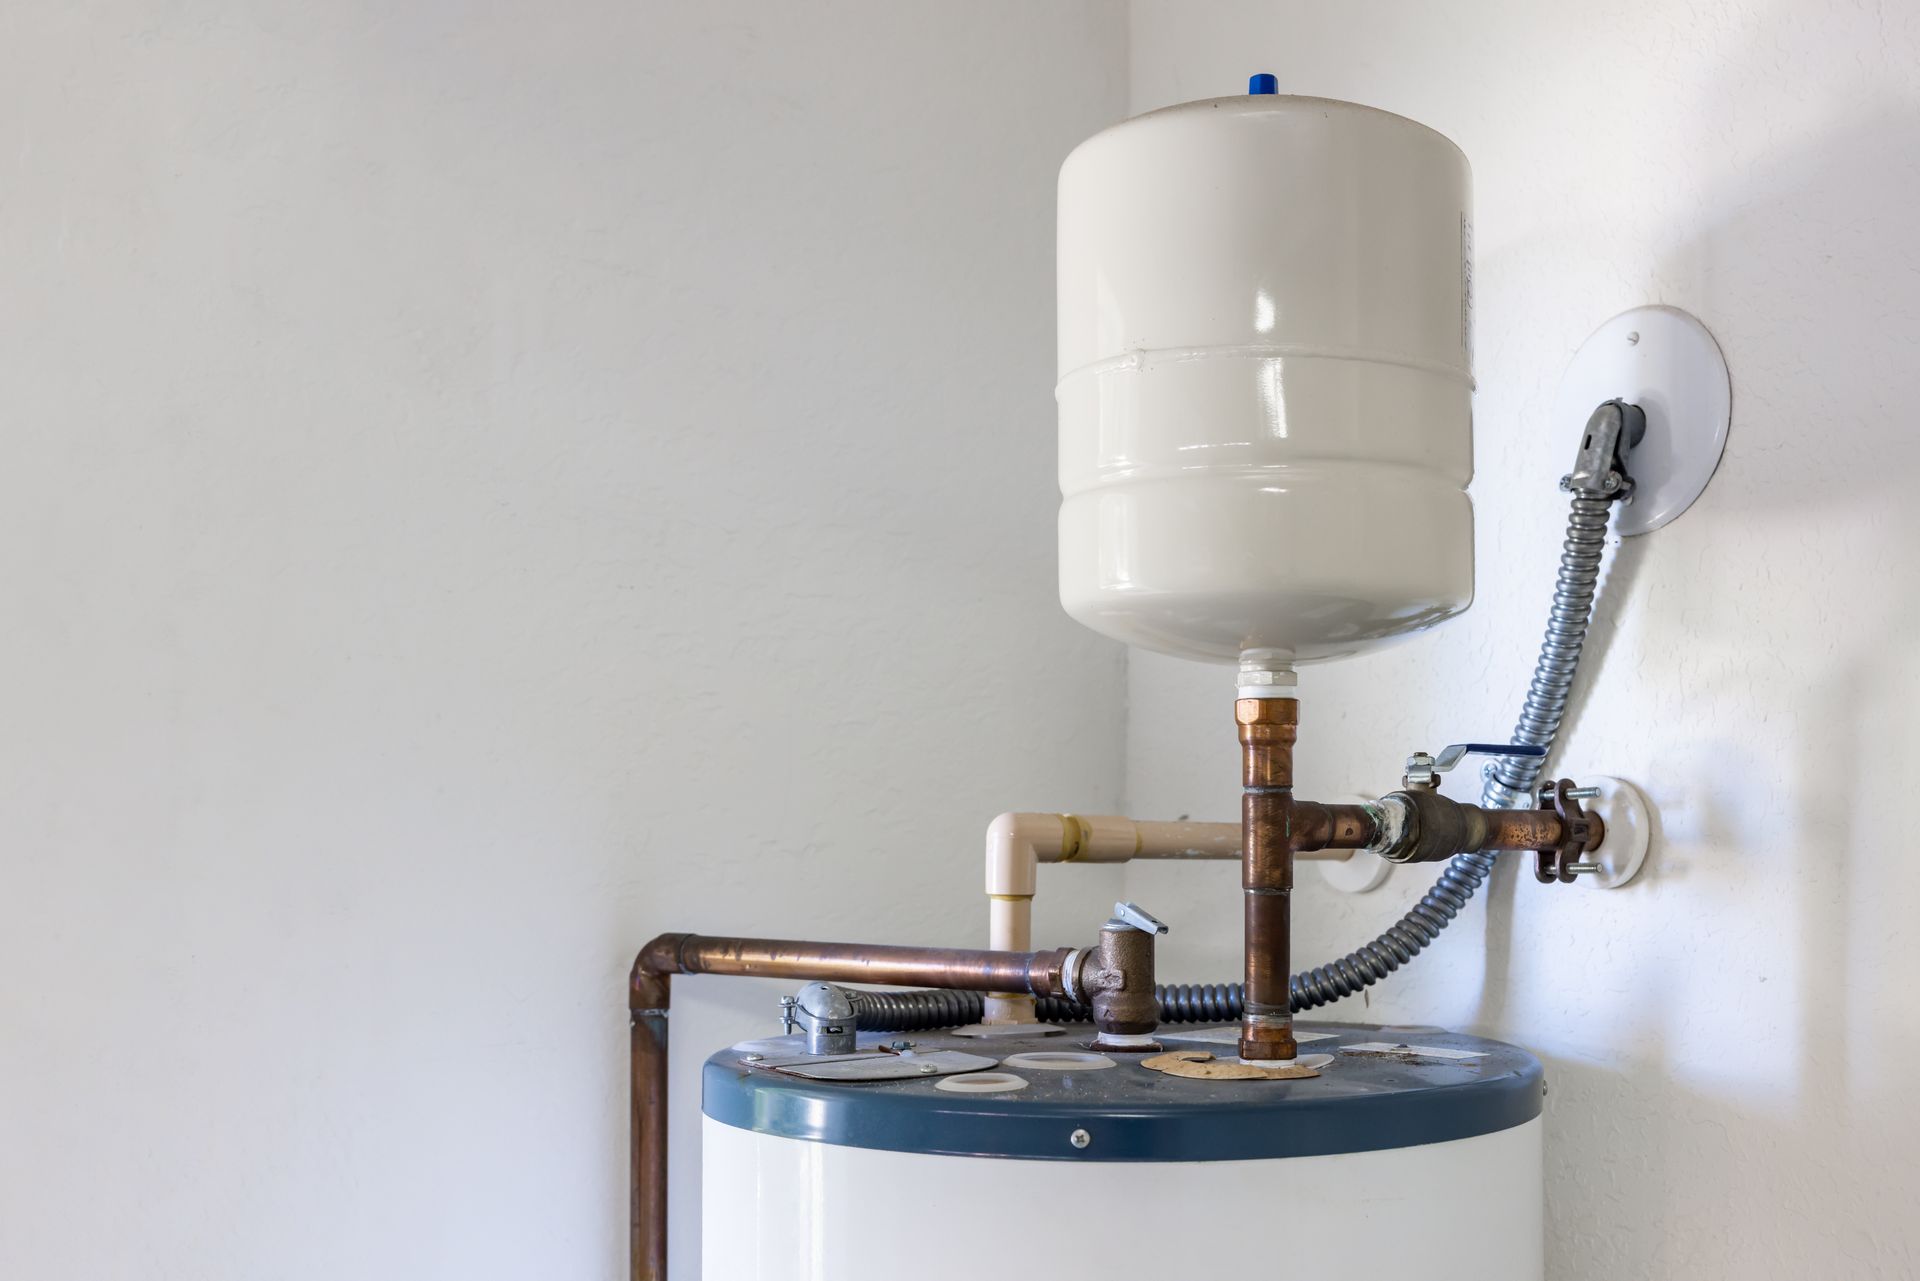 A water heater is mounted to the wall in a room.